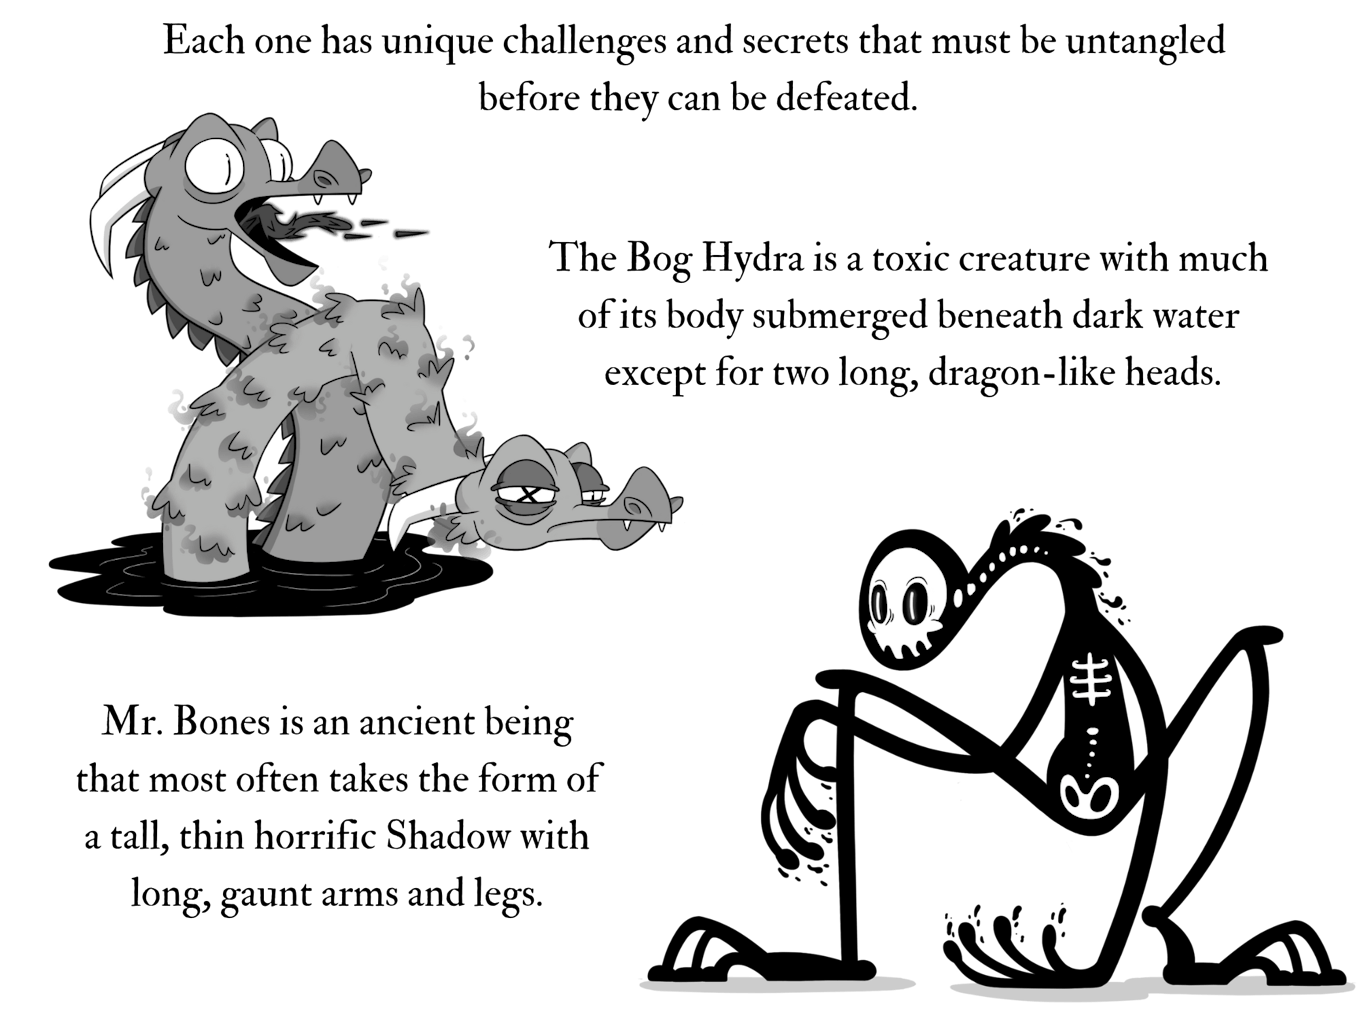 An image of a hydra emerging from the ink and a skeletal creature crouching down. The text reads, each one has unique challenges and secrets that must be untangled before they can be defeated. The Bog Hydra is a toxic creature with much  of its body submerged beneath dark water  except for two long, dragon-like heads. Mr. Bones is an ancient being that most often takes the form of a tall, thin horrific Shadow with long, gaunt arms and legs.